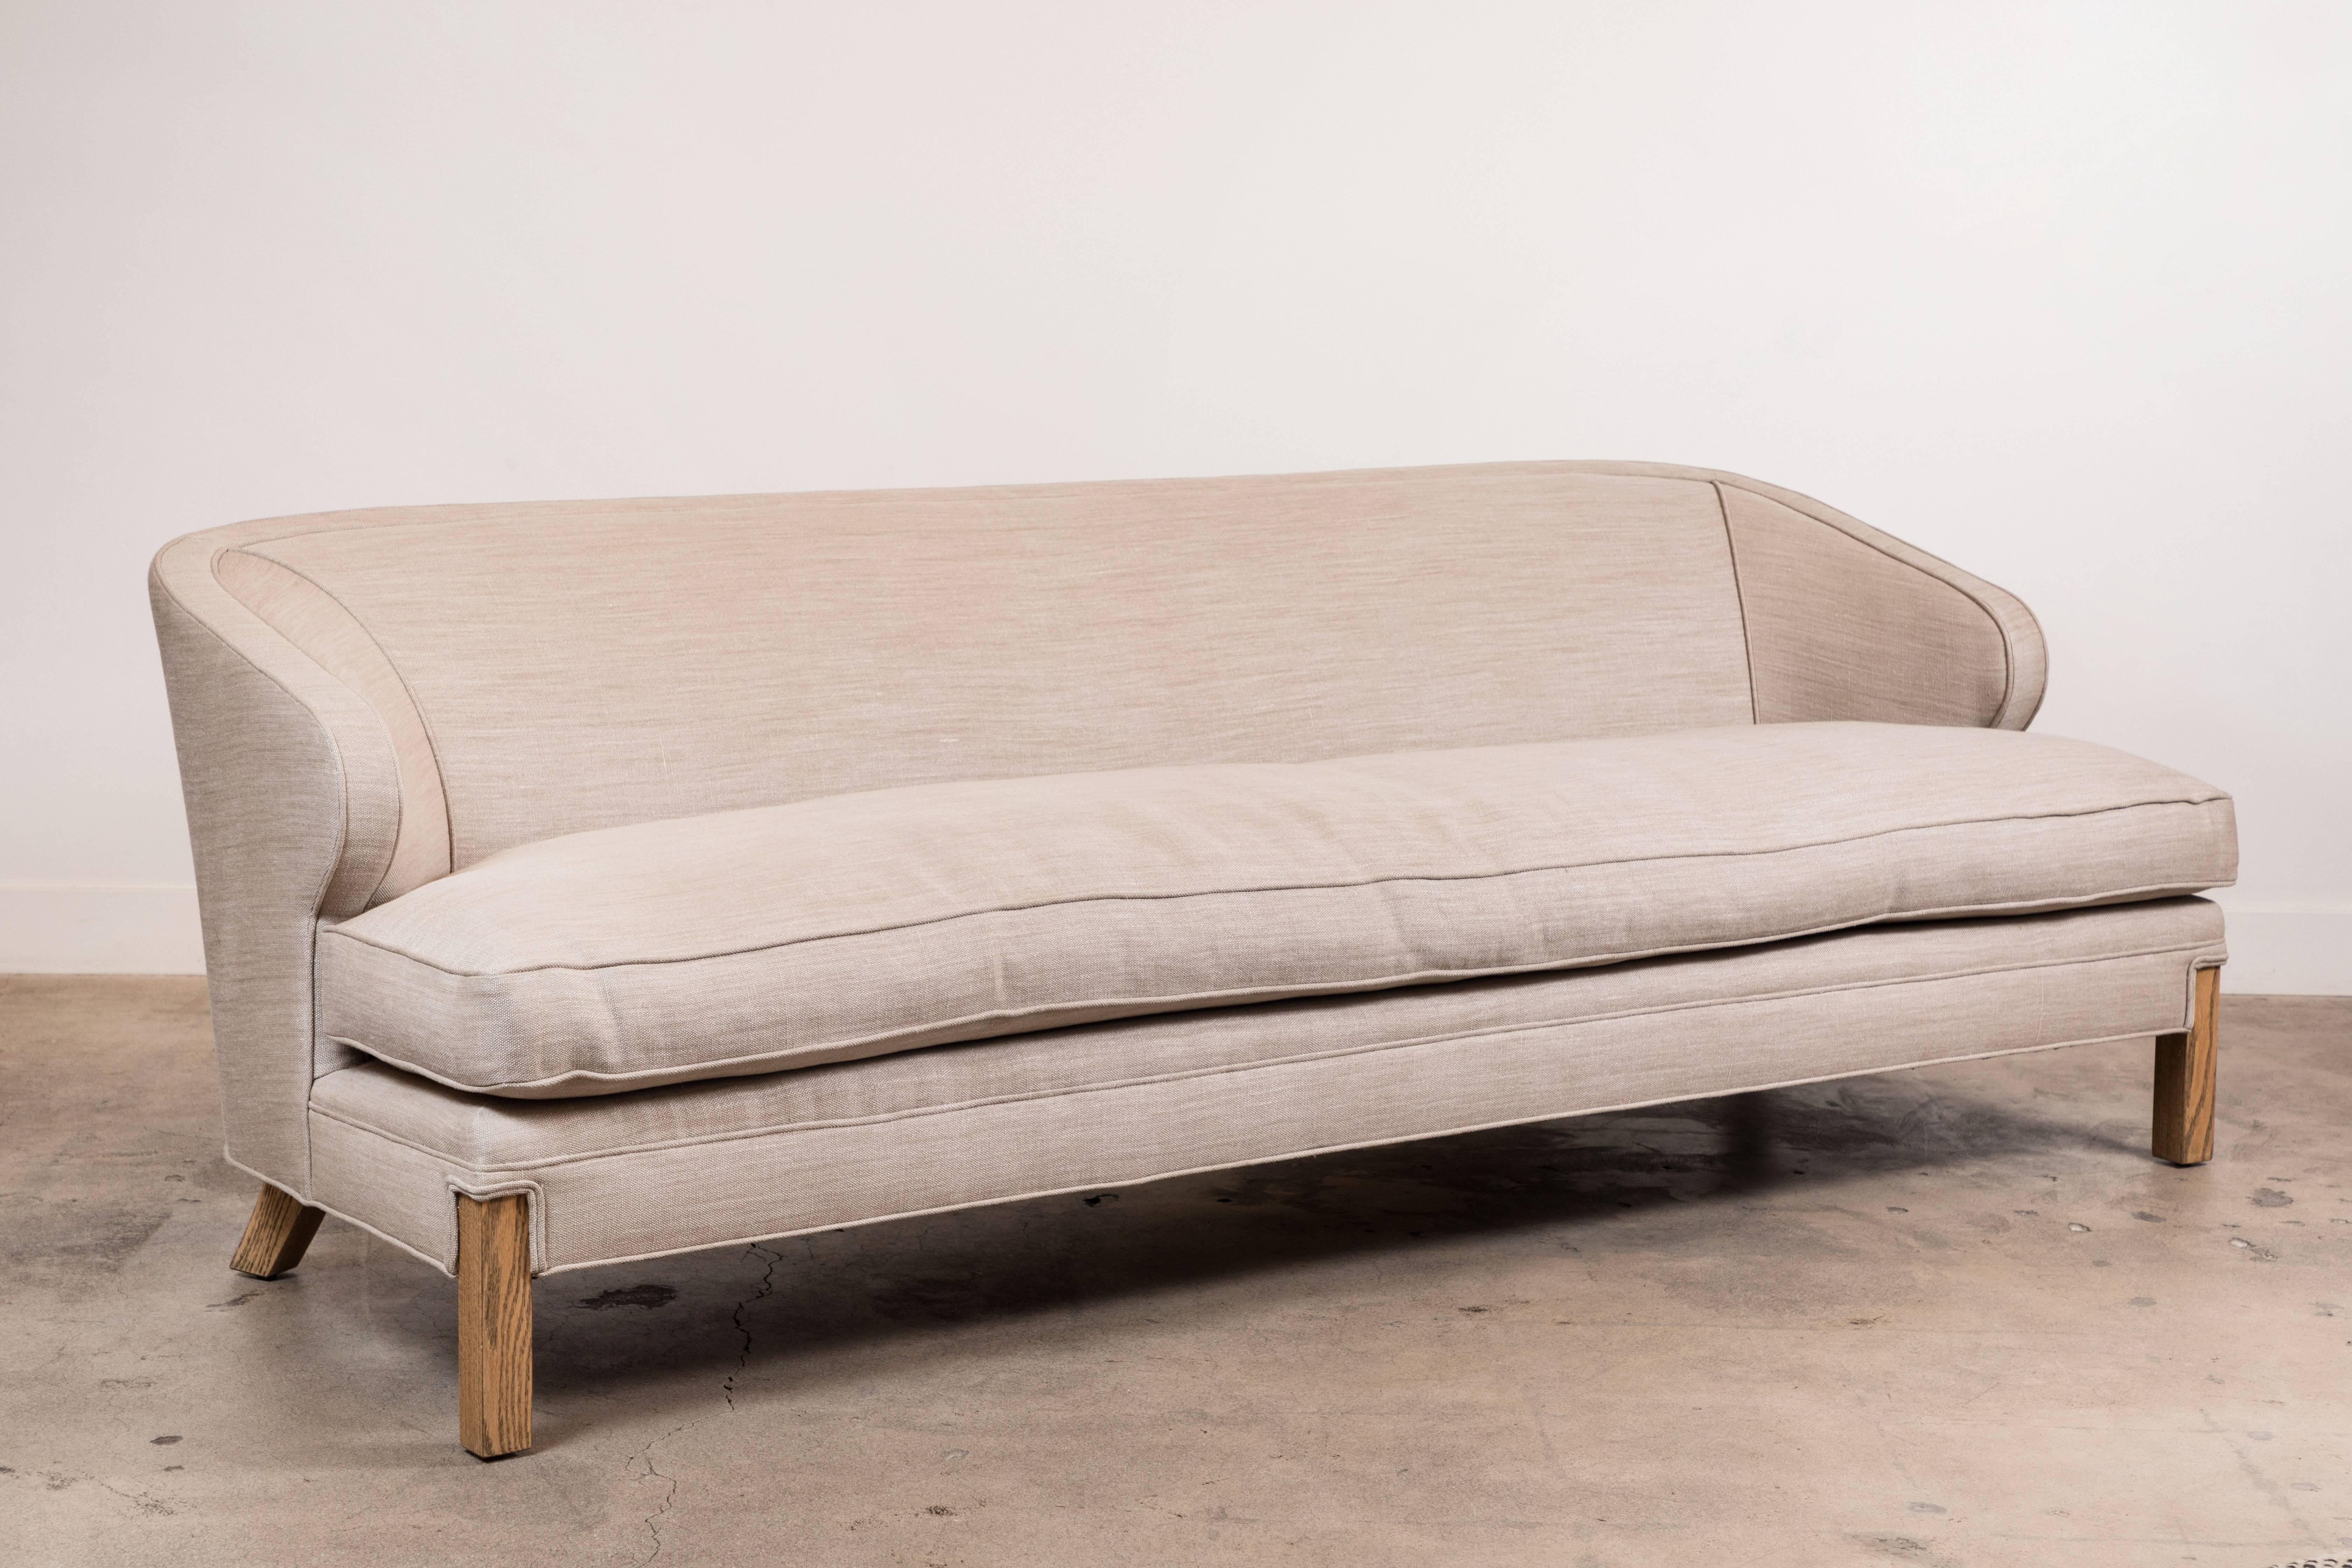 The Douglas Sofa is a low slung sofa with a down-wrapped seat cushion and solid American walnut or white oak legs.

Available to order in Customer's Own Material with a 6-8 week lead time. 

As shown: $5,040
To order: $3,450 + COM.